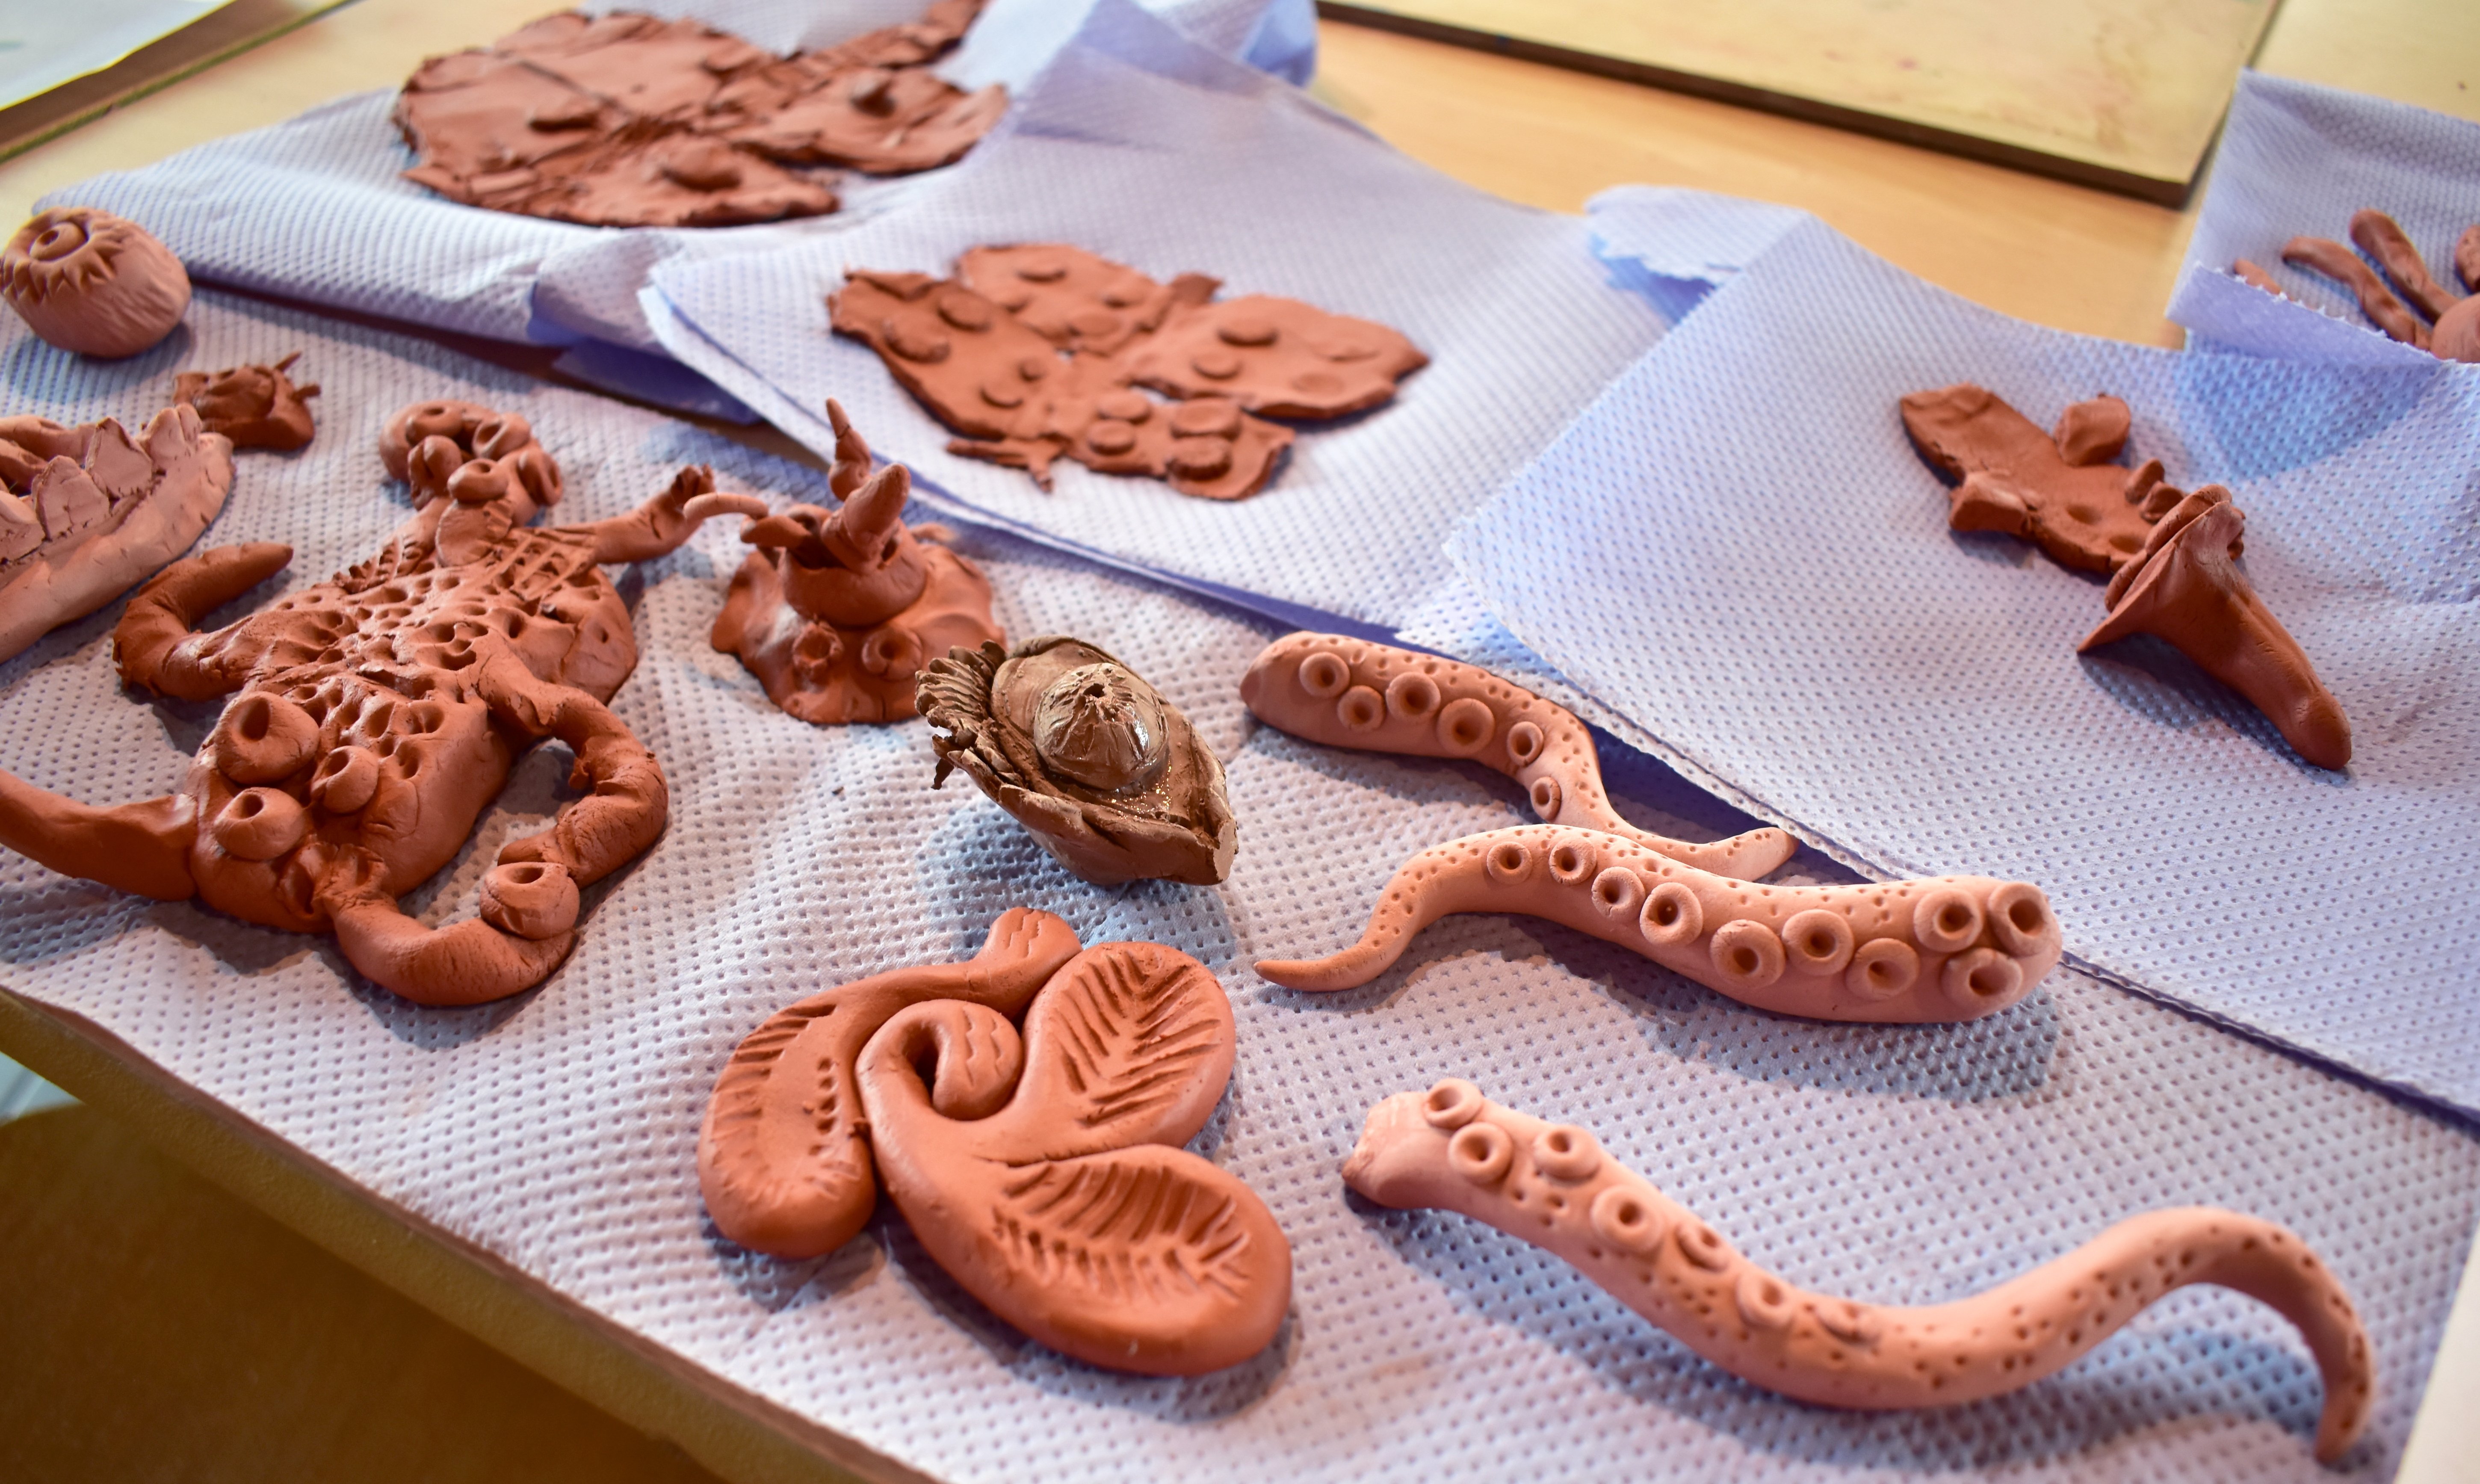 Clay creatures inspired by Non's exhibition